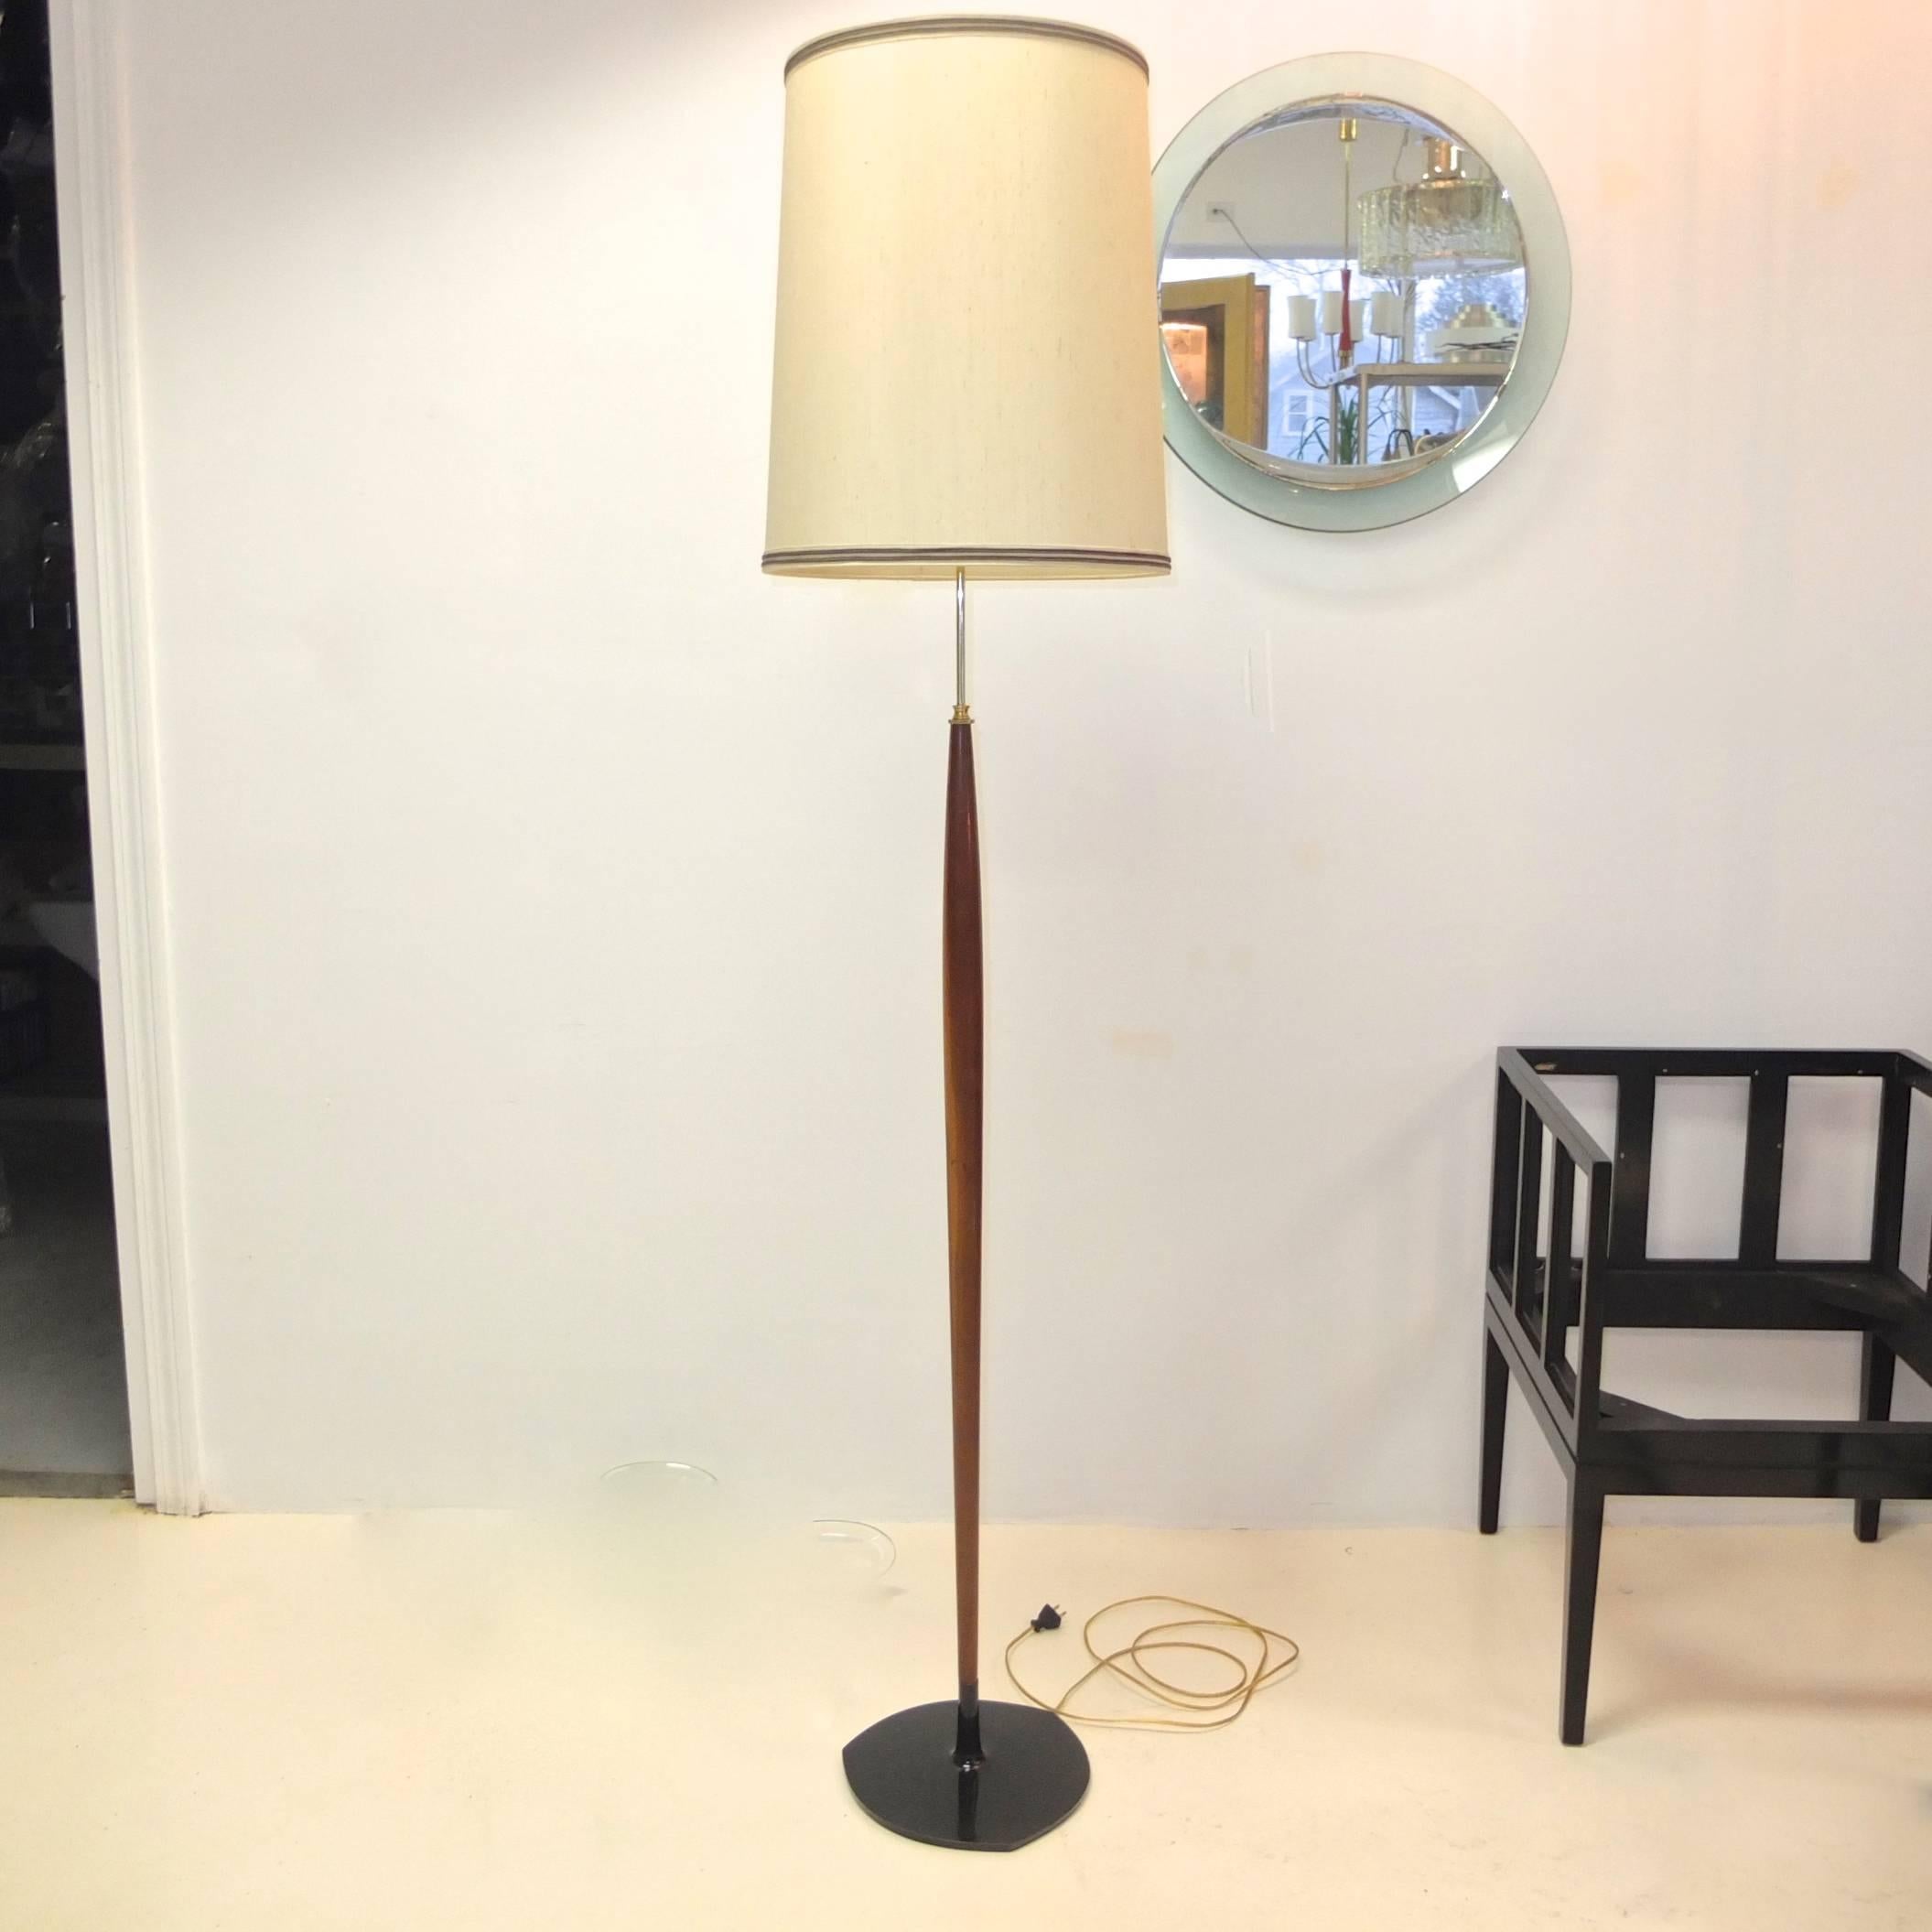 Scandinavian floor lamp from the 1960s of unusual form with sculptural tapered teak which has been turned in such a way as to taper from the base at a Fine point then flare out to form a bulbous belly, like a snake digesting its prey, finally